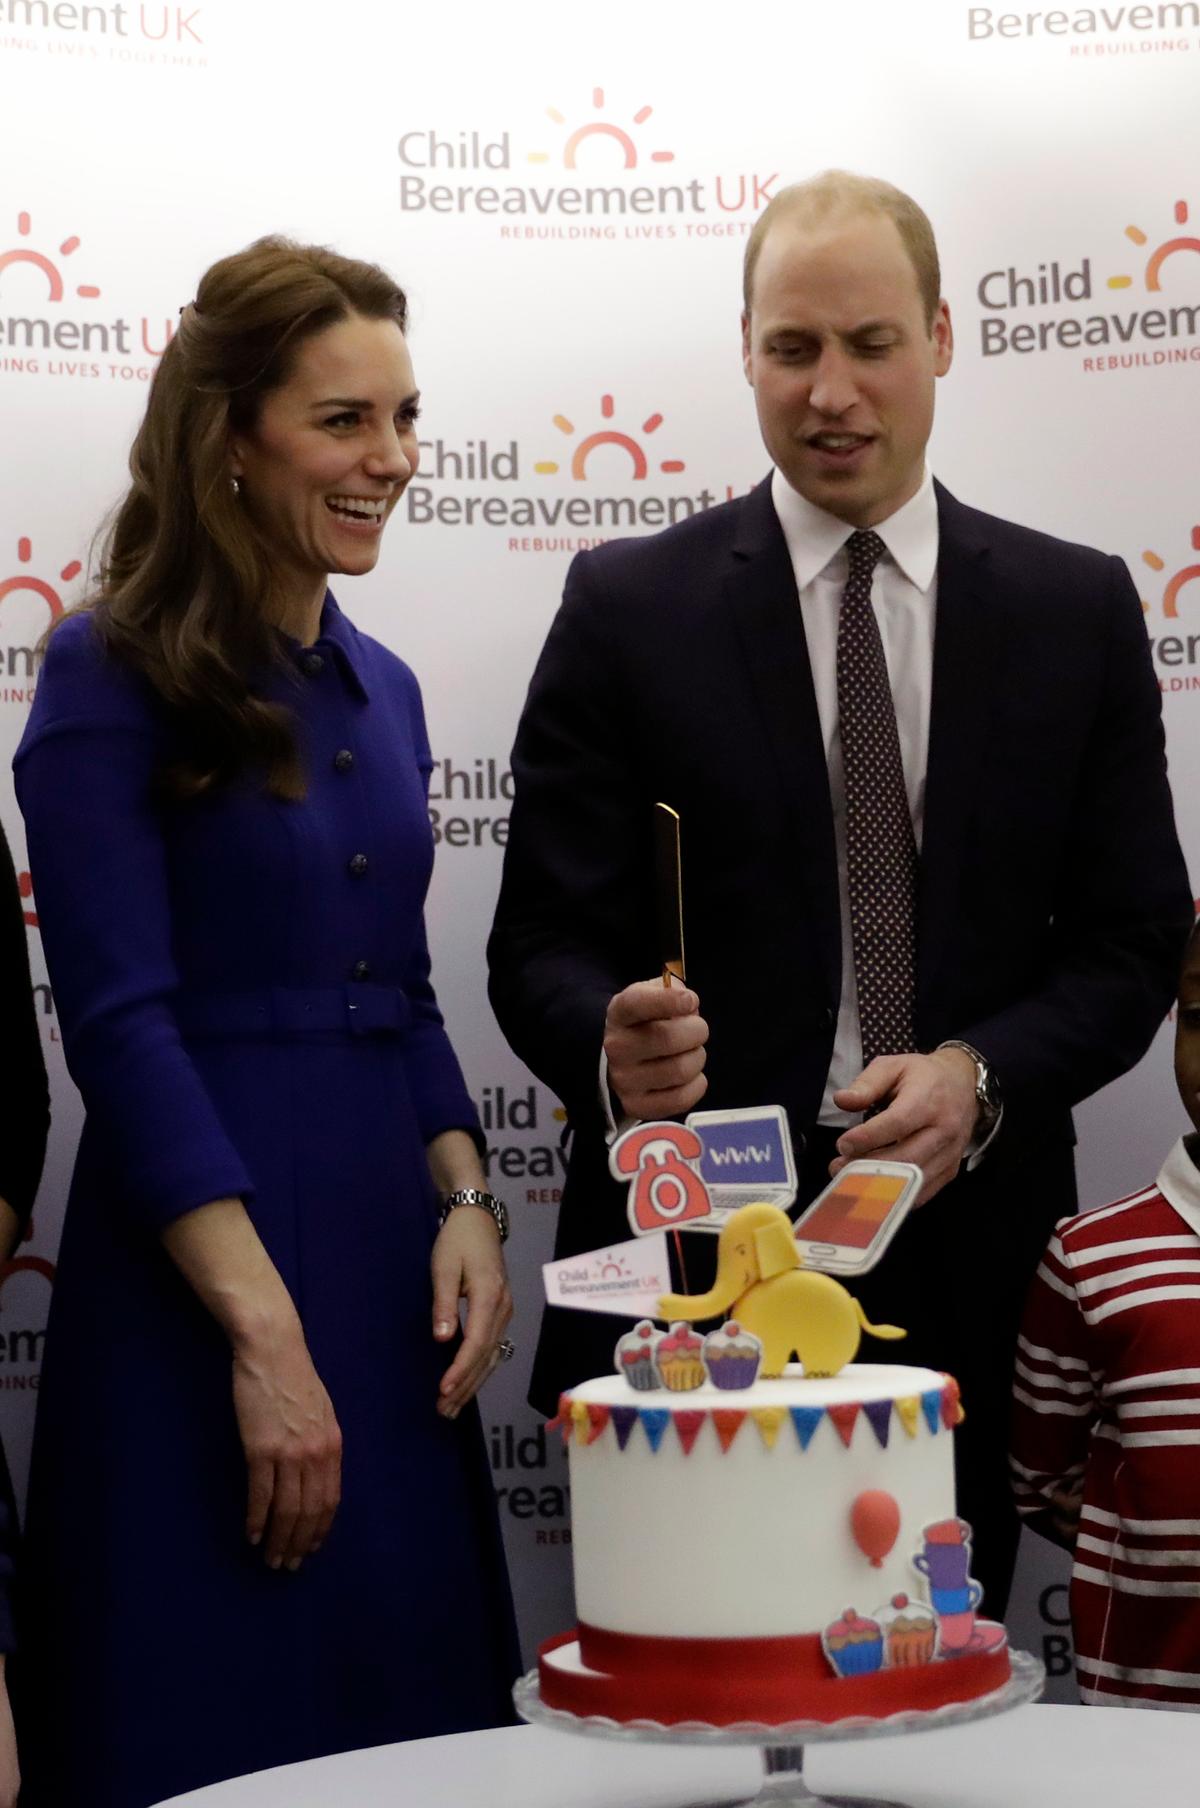 Britain's Prince William and his wife Kate the Duchess of Cambridge at a Child Bereavement UK Centre in Stratford in east London on Jan. 11, 2017. (AP Photo/Matt Dunham, Pool)